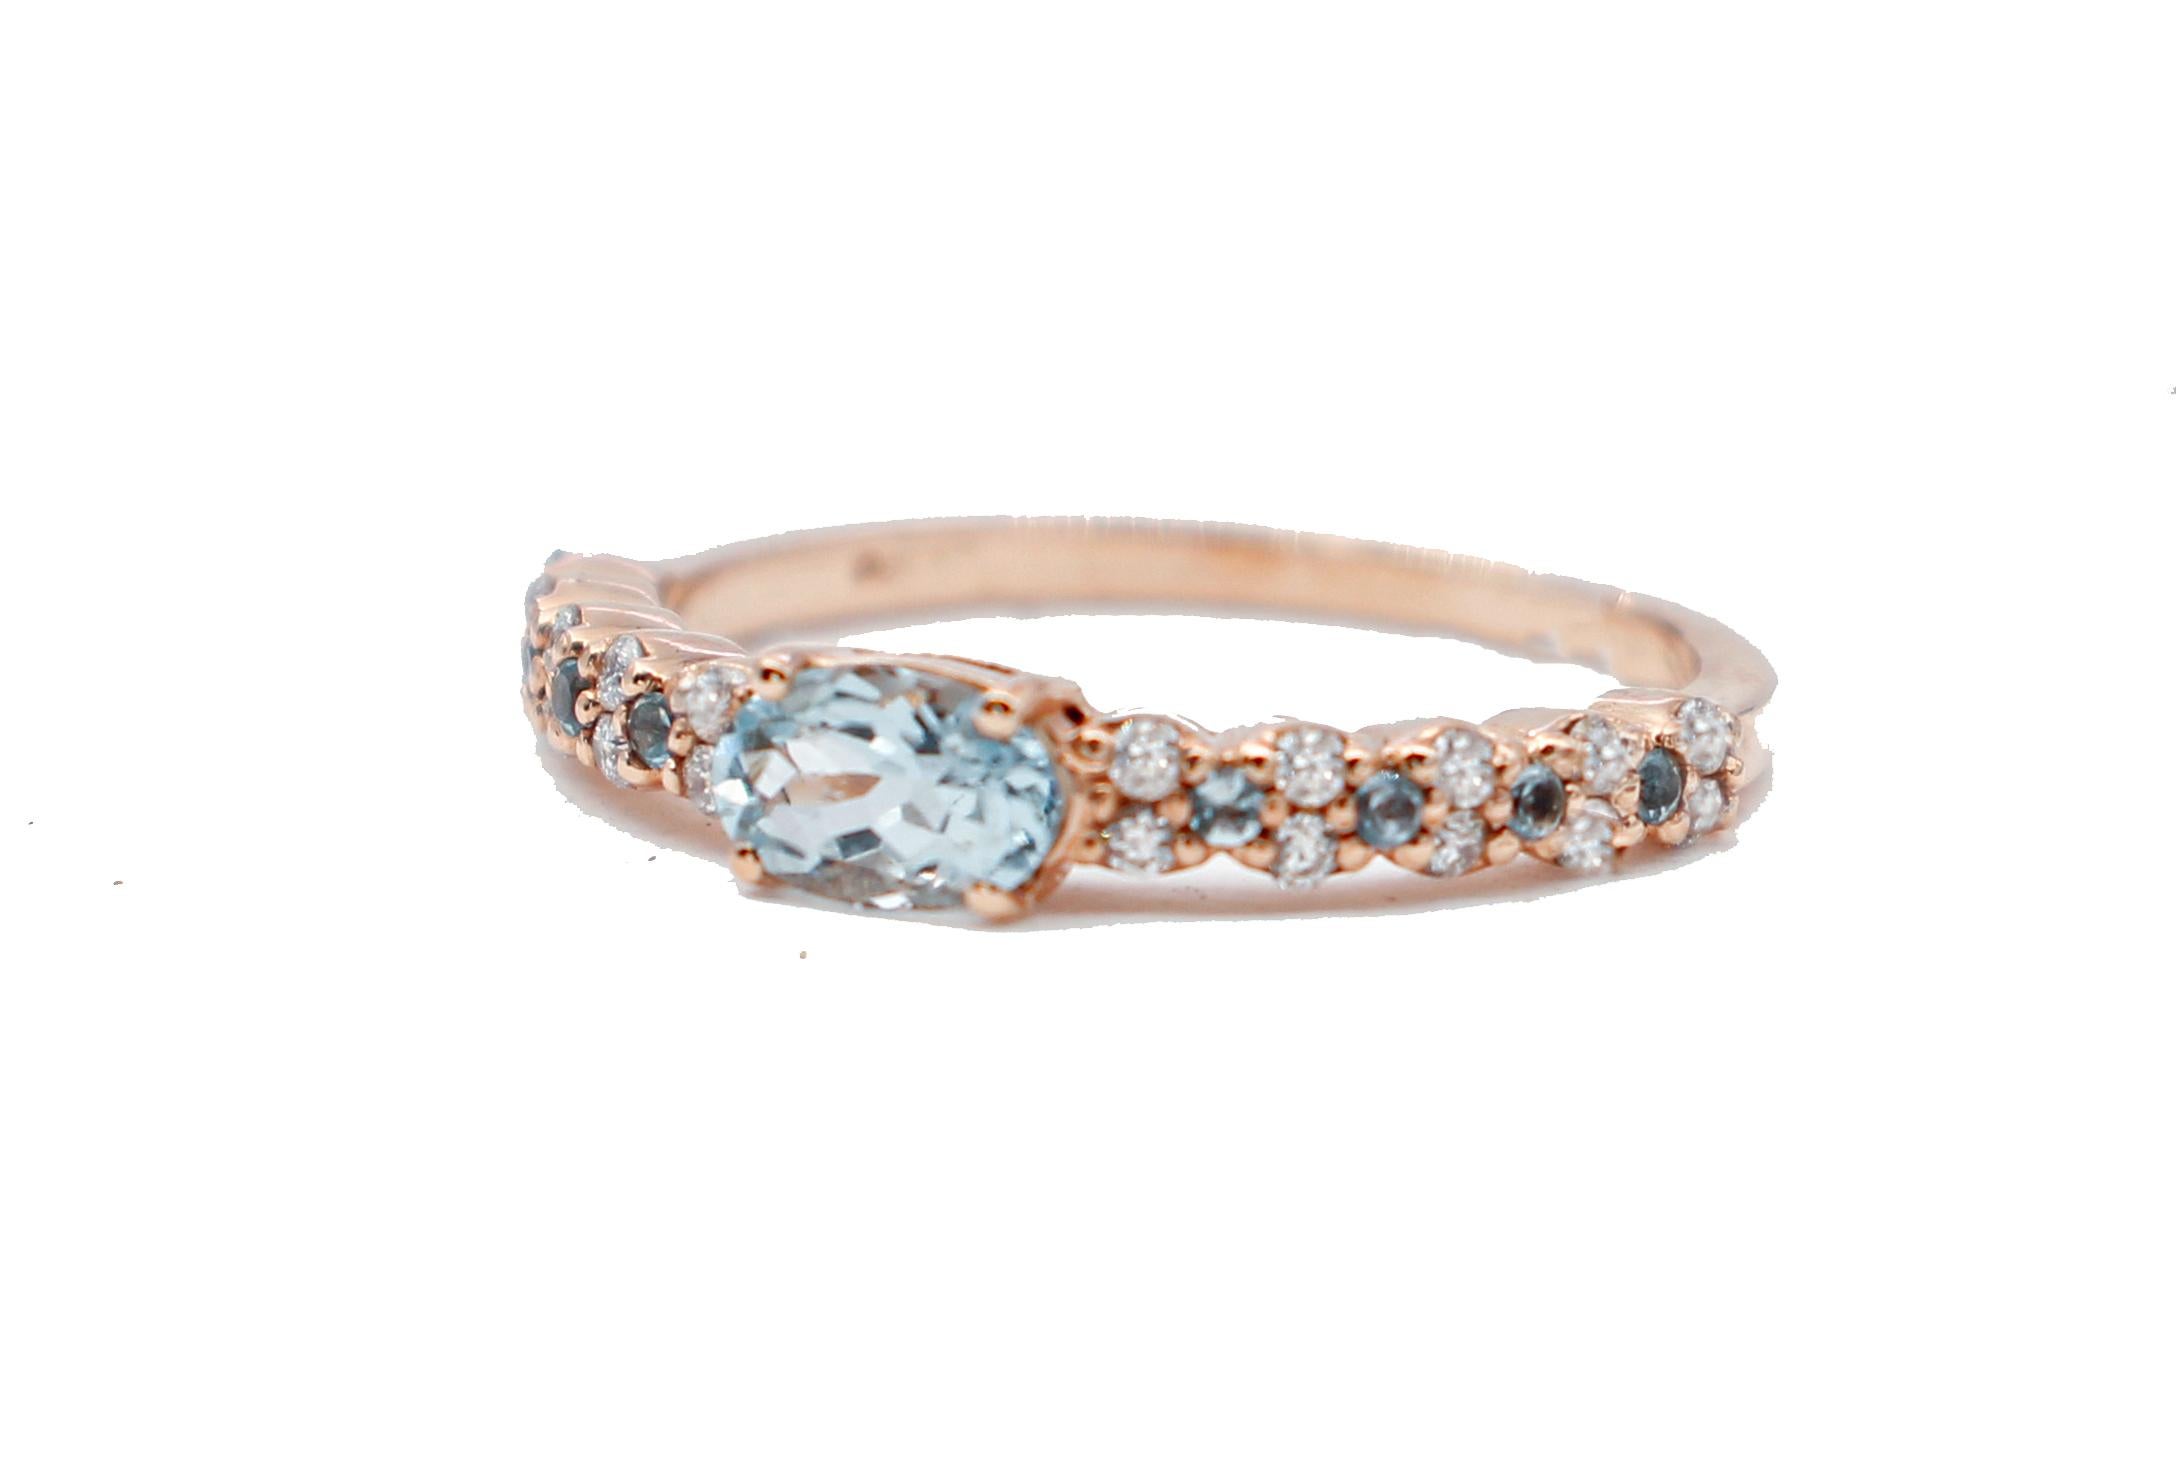 SHIPPING POLICY:
No additional costs will be added to this order.
Shipping costs will be totally covered by the seller (customs duties included). 


Gorgeous modern ring in 18 karat rose gold structure mounted with an oval aquamarine  ( 6mm x 4 mm)